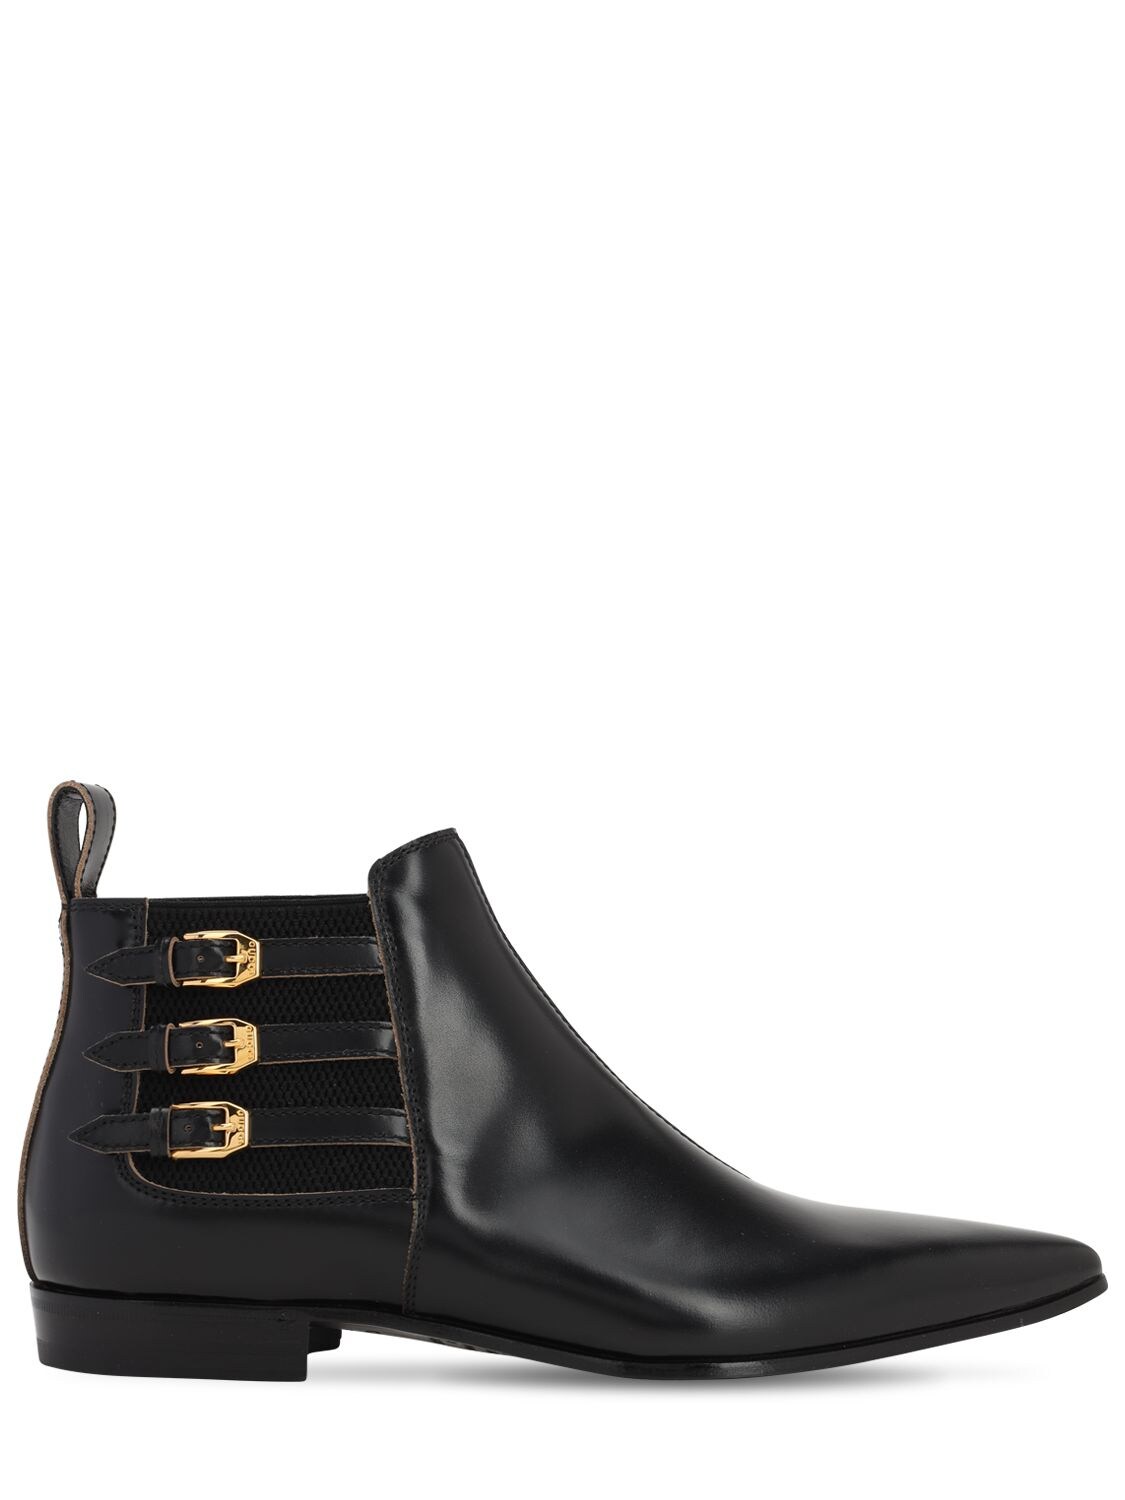 GUCCI 20MM POINTED LEATHER BOOTS,71IH0M003-MTAWMA2